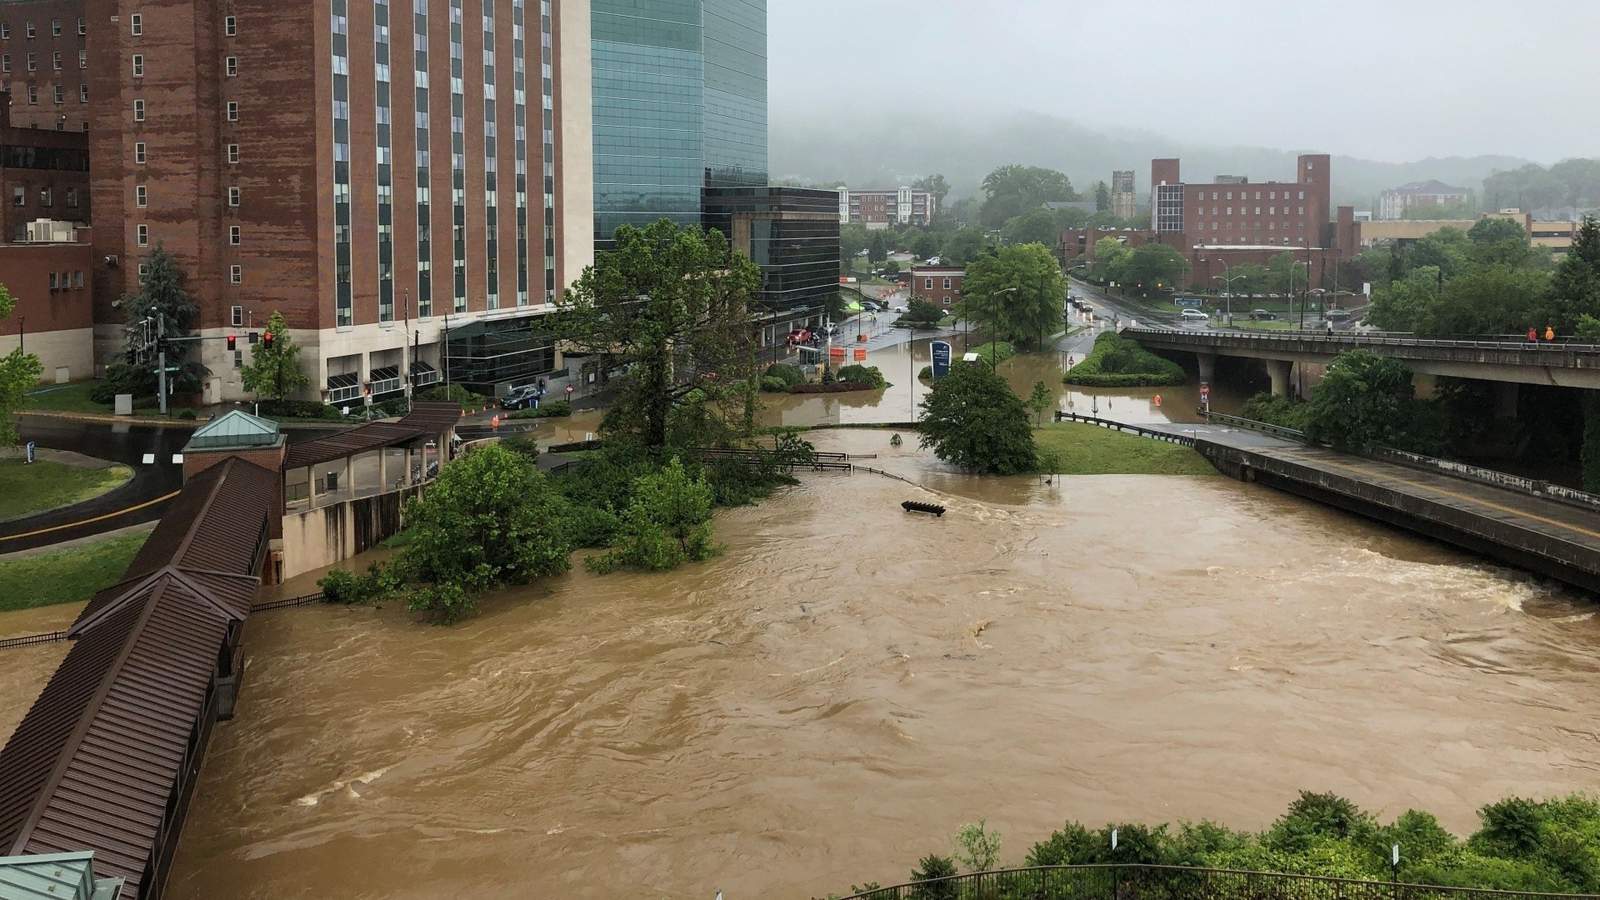 Where this past week’s wet weather ranks in Southwest Virginia history